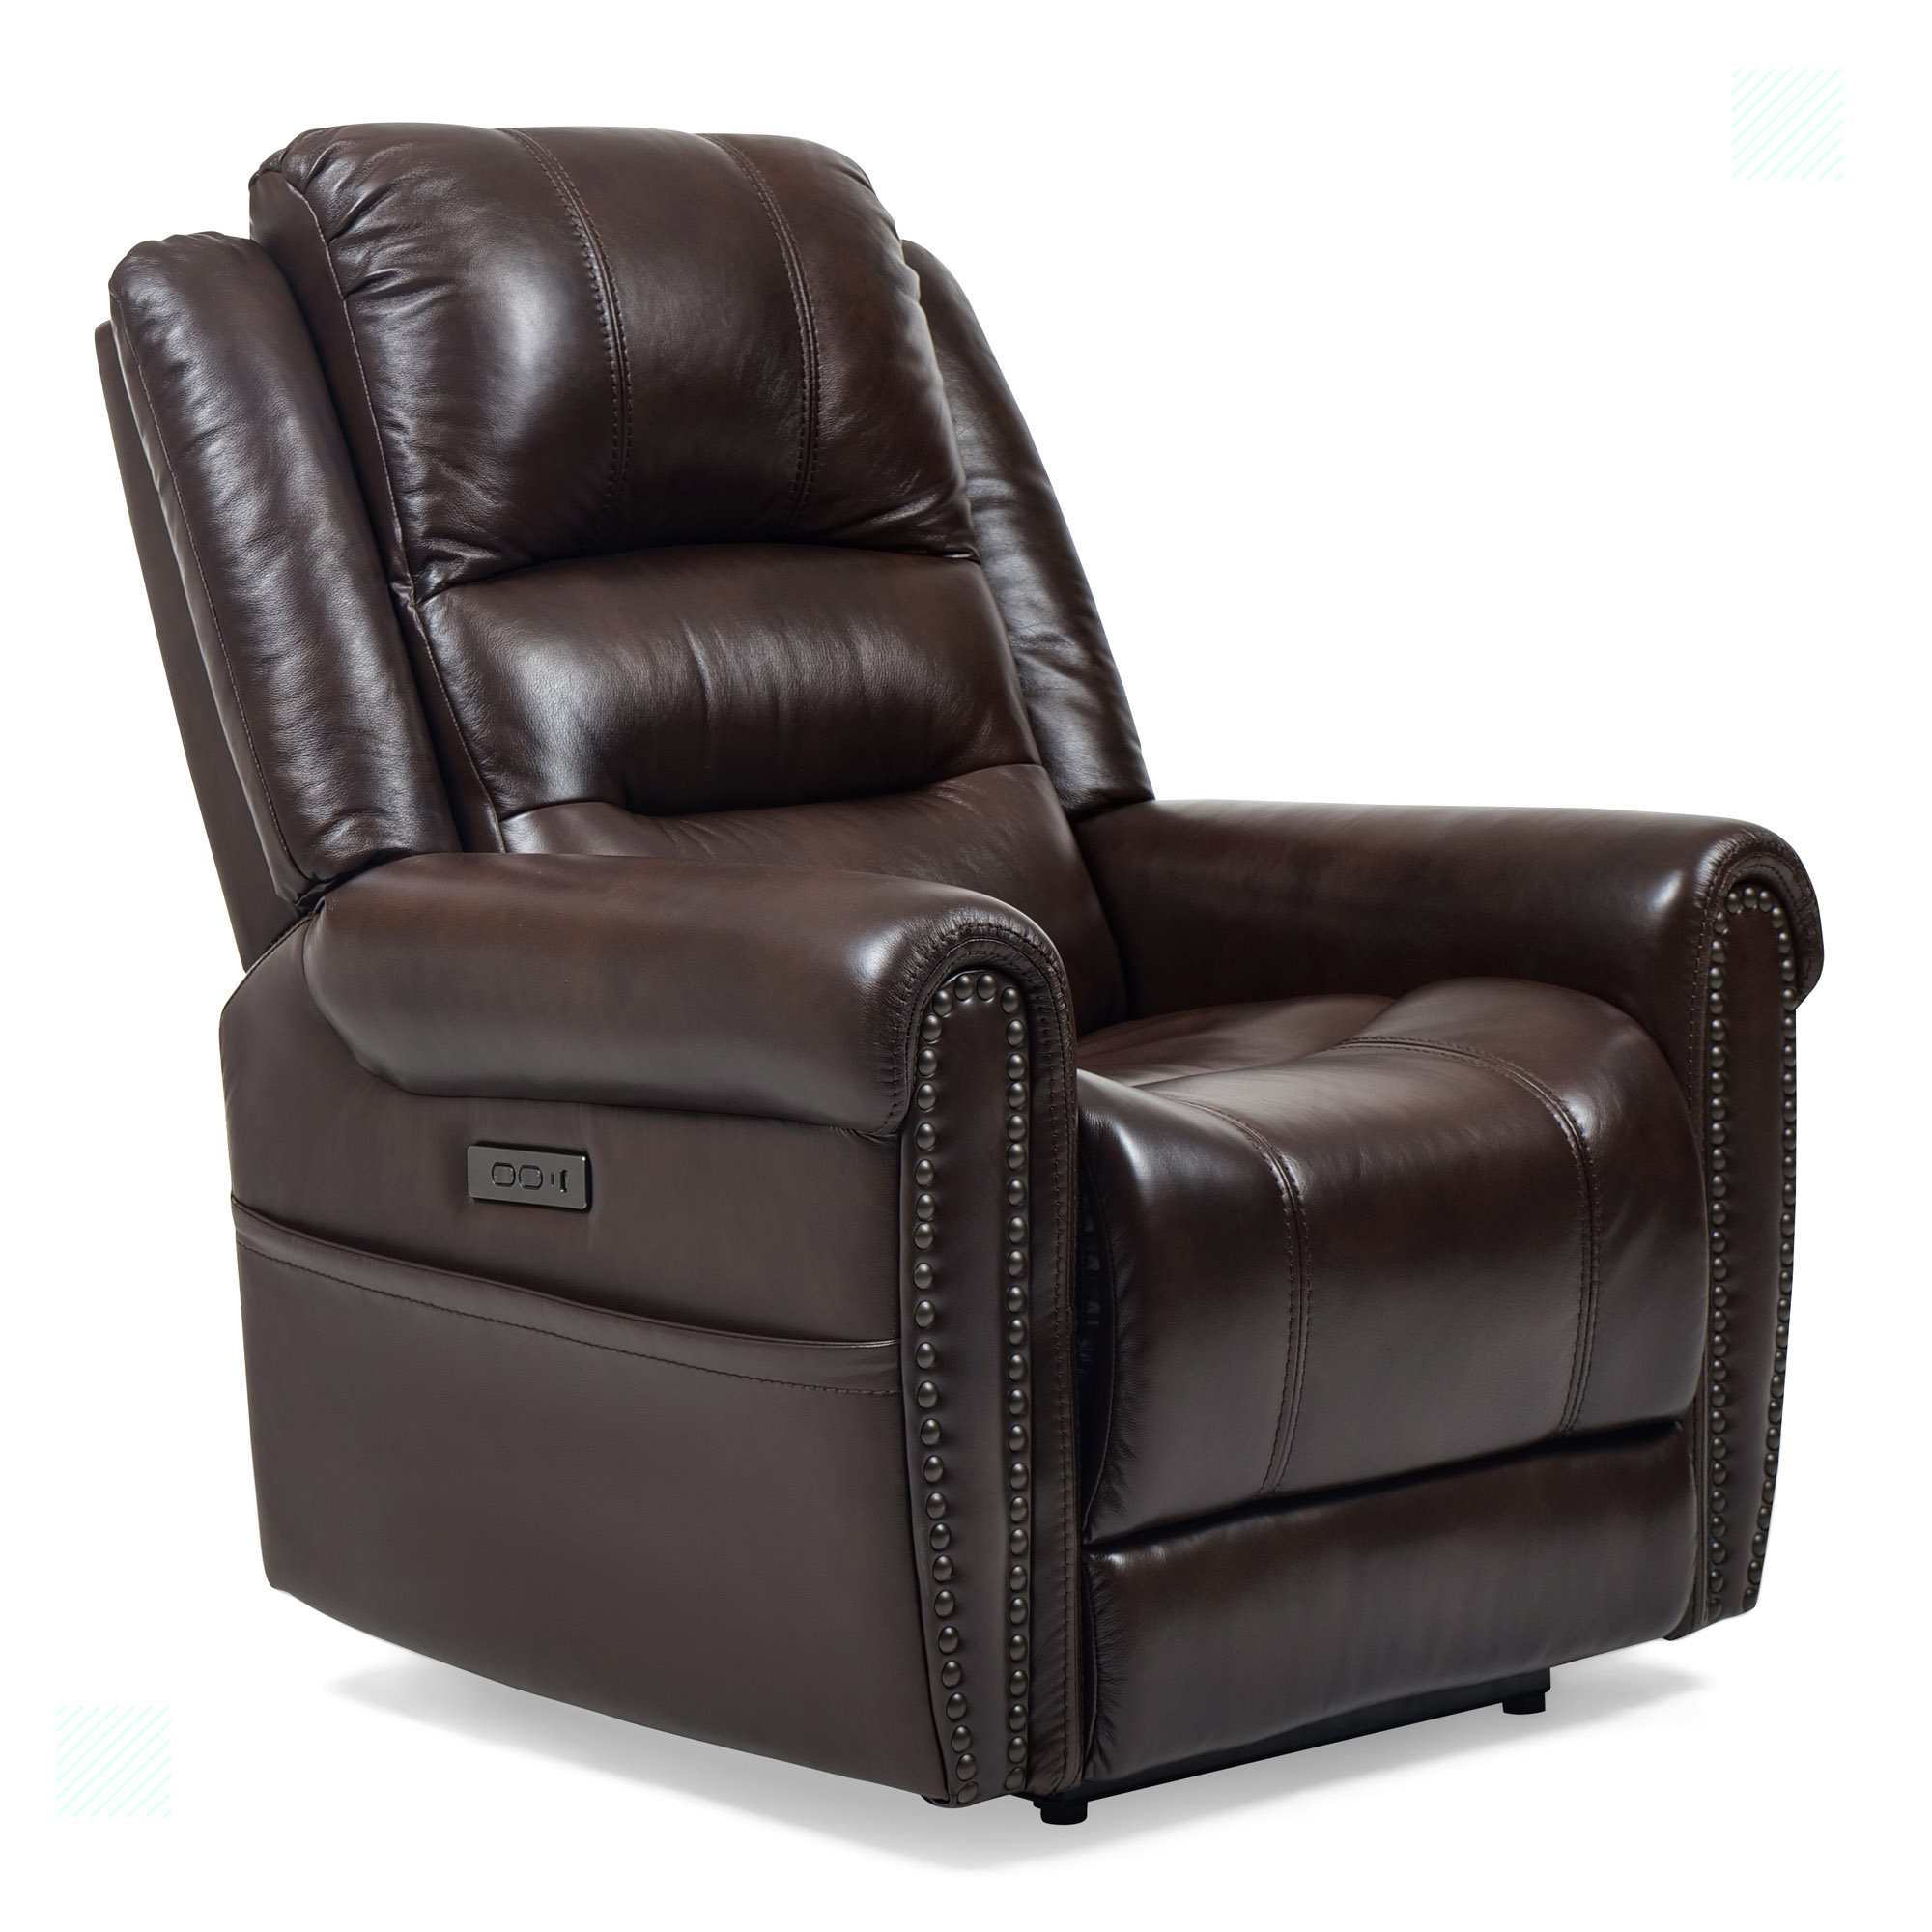 Shohista Faux Leather Recliner